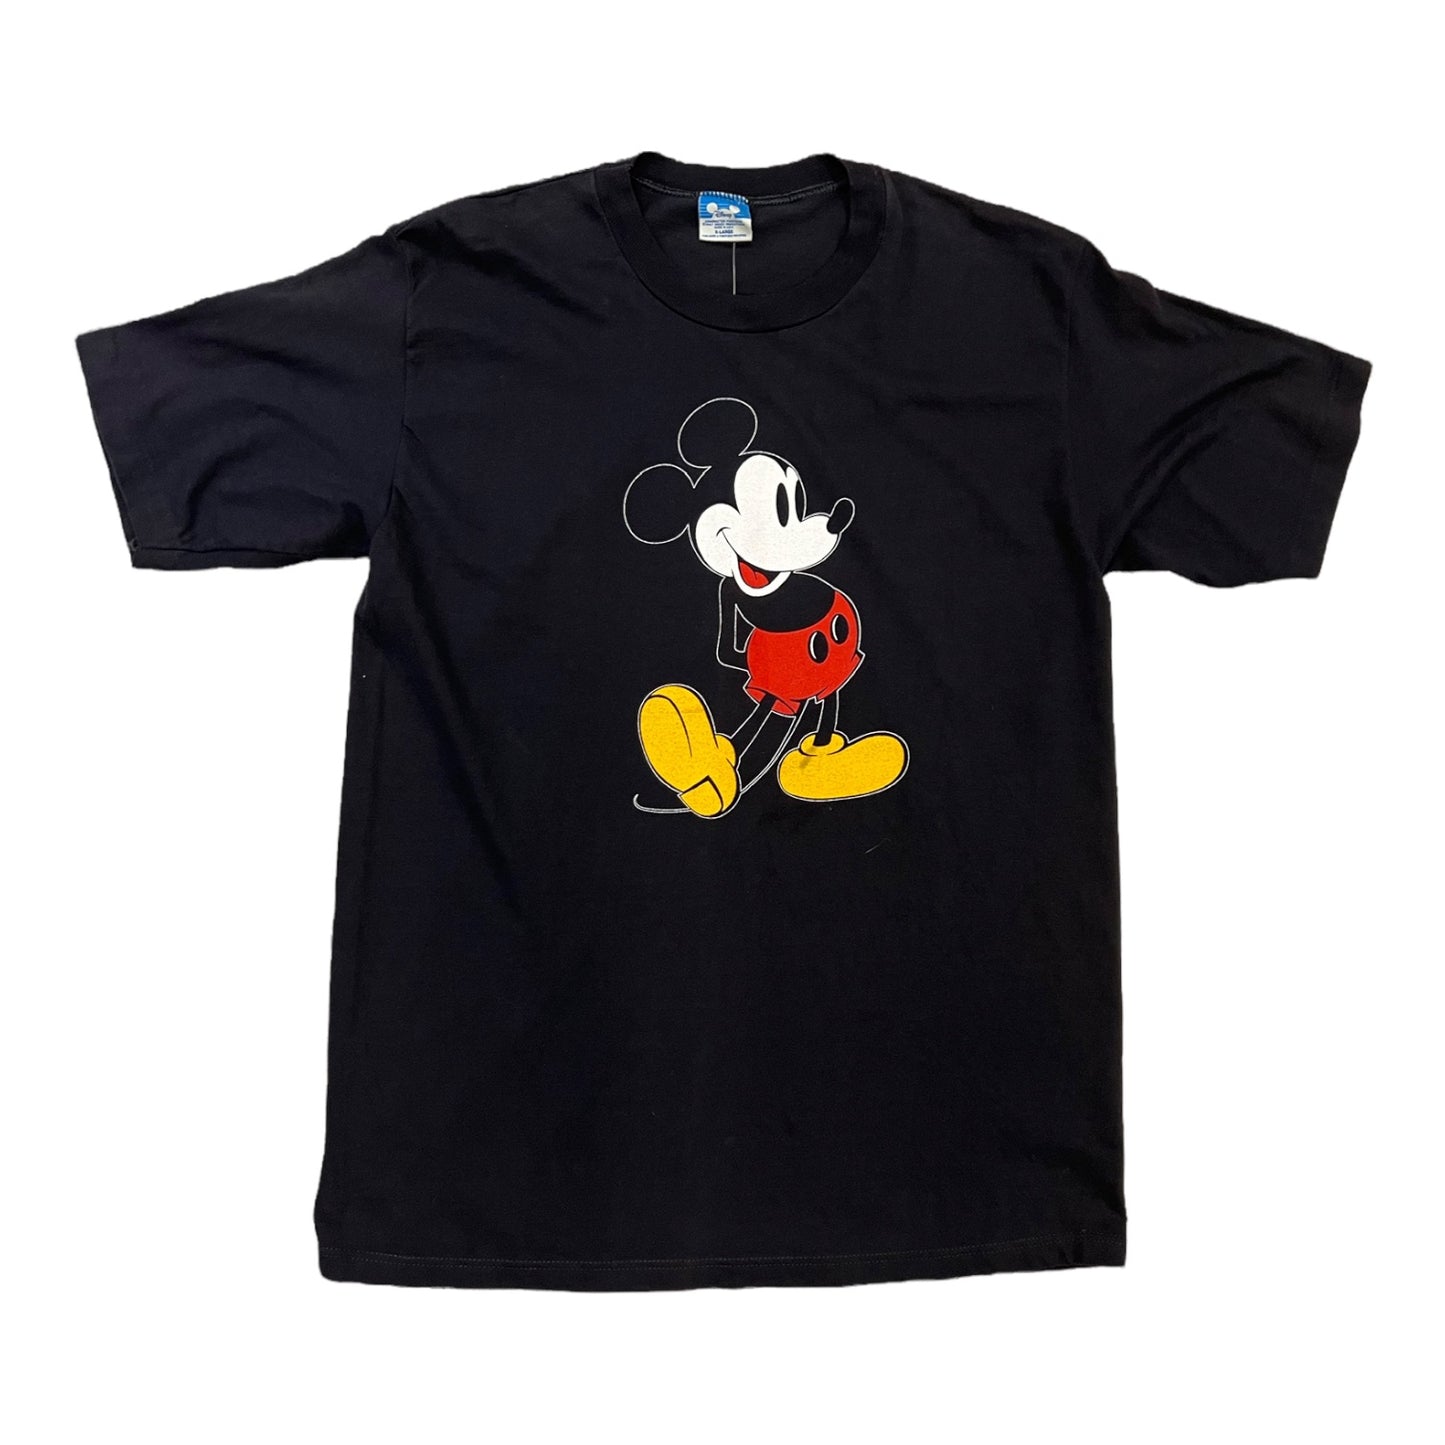 1980's vintage Mickey Mouse graphic tee